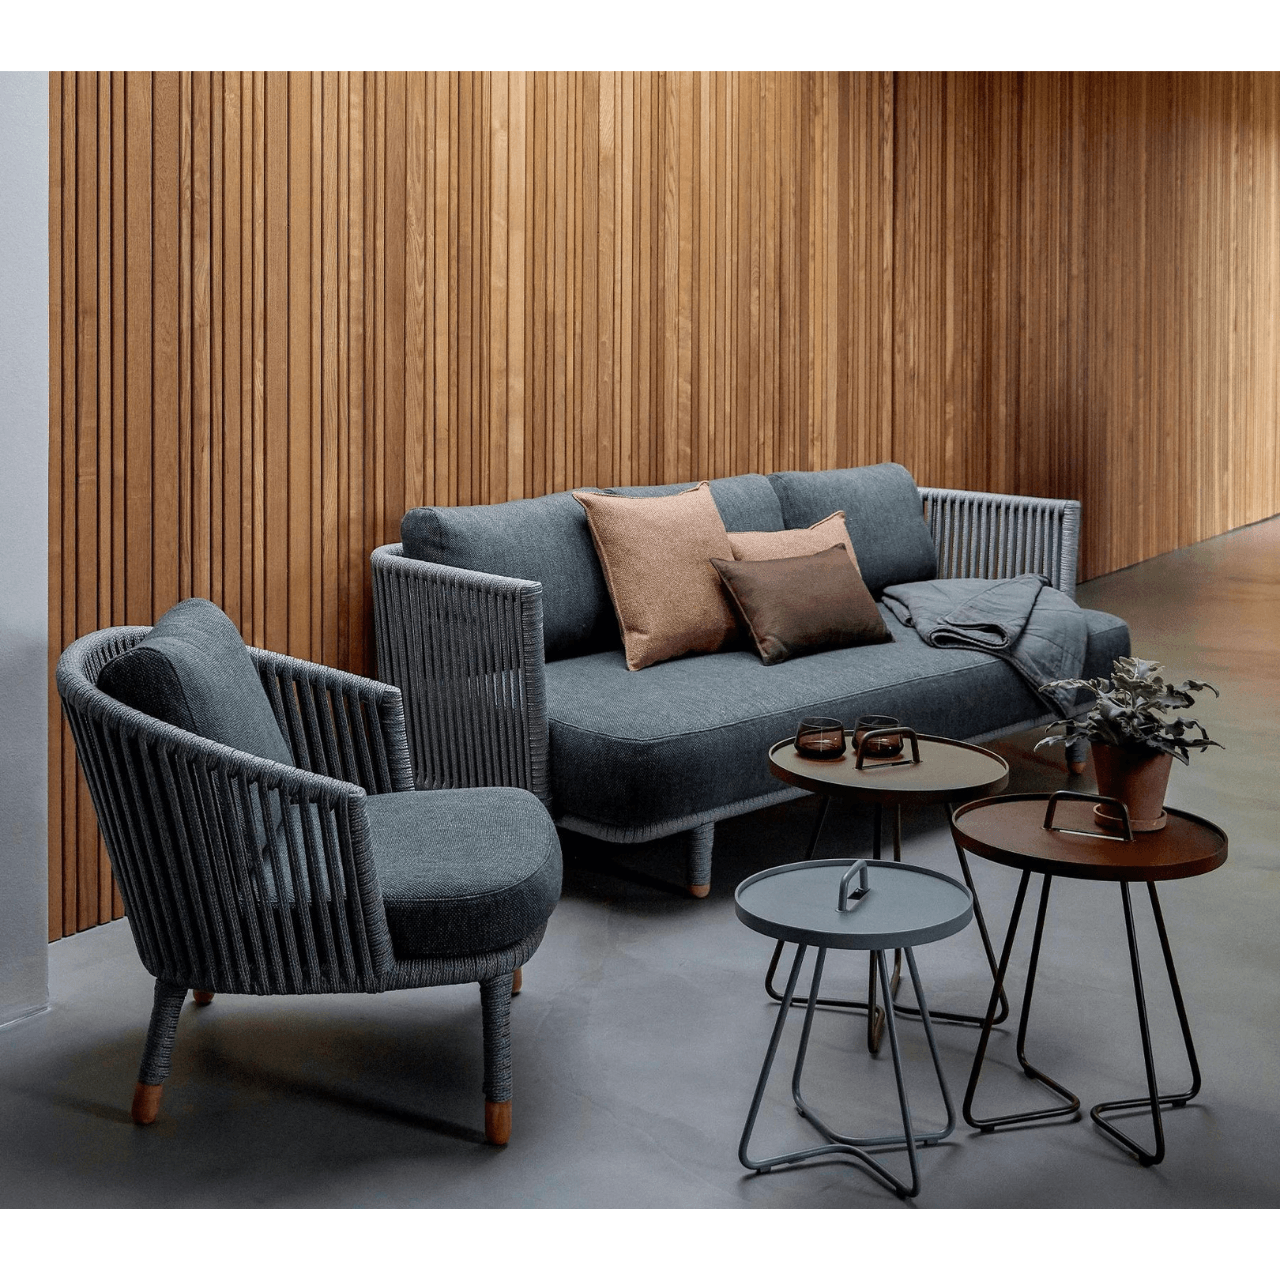 Boxhill's On-The-Move light grey and brown outdoor round side table, grey outdoor lounge chair and grey outdoor sofa placed against wooden wall